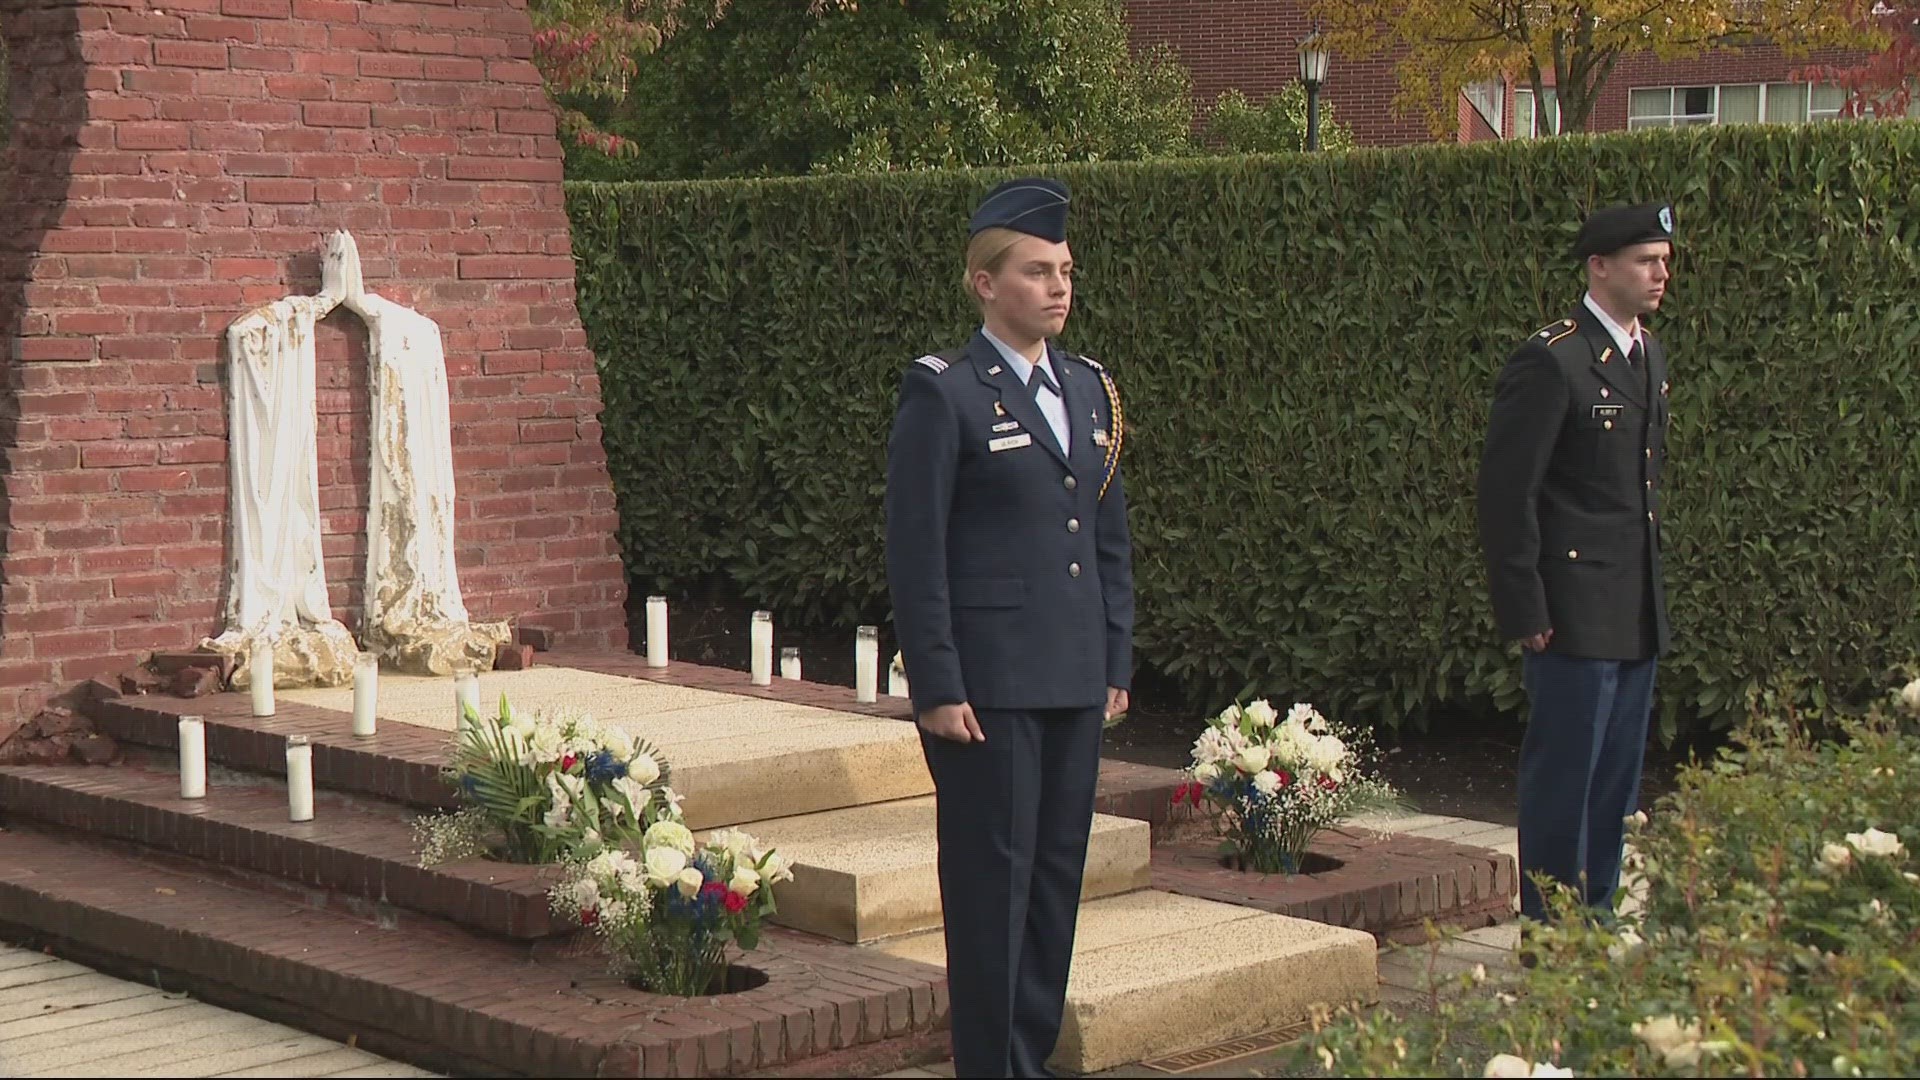 Army and Air Force ROTC cadets are standing watch for 24 hours at the university’s Praying Hands Memorial.